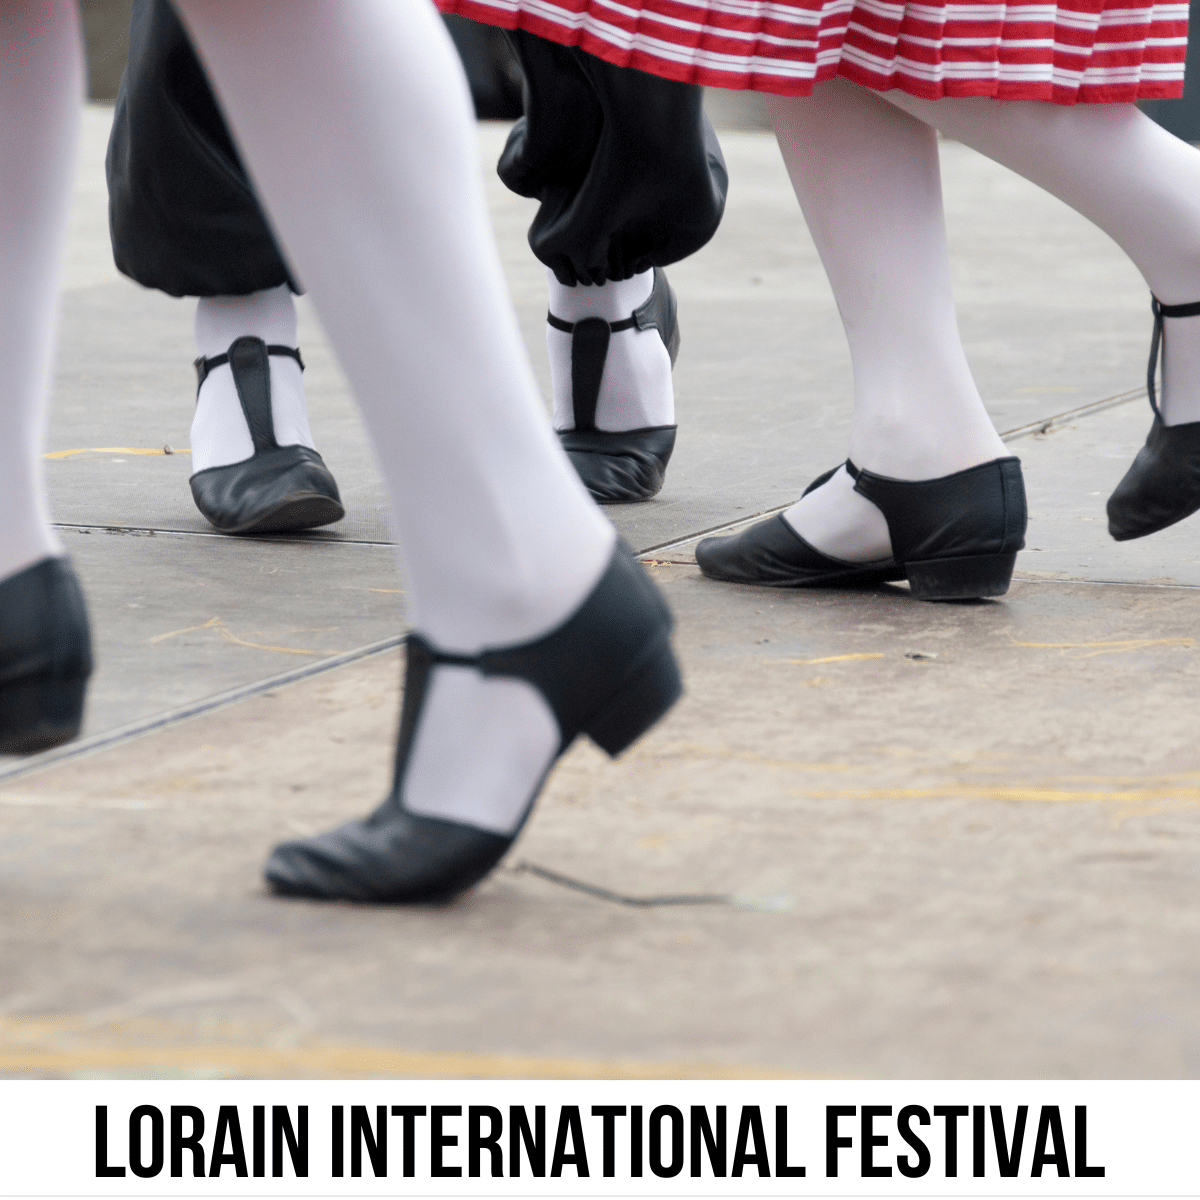 A square image of a close-up photo of three people's feet and legs, as they are dancing. They are all wearing black shoes and white legging. A white strip across the bottom has text Lorain International Festival.